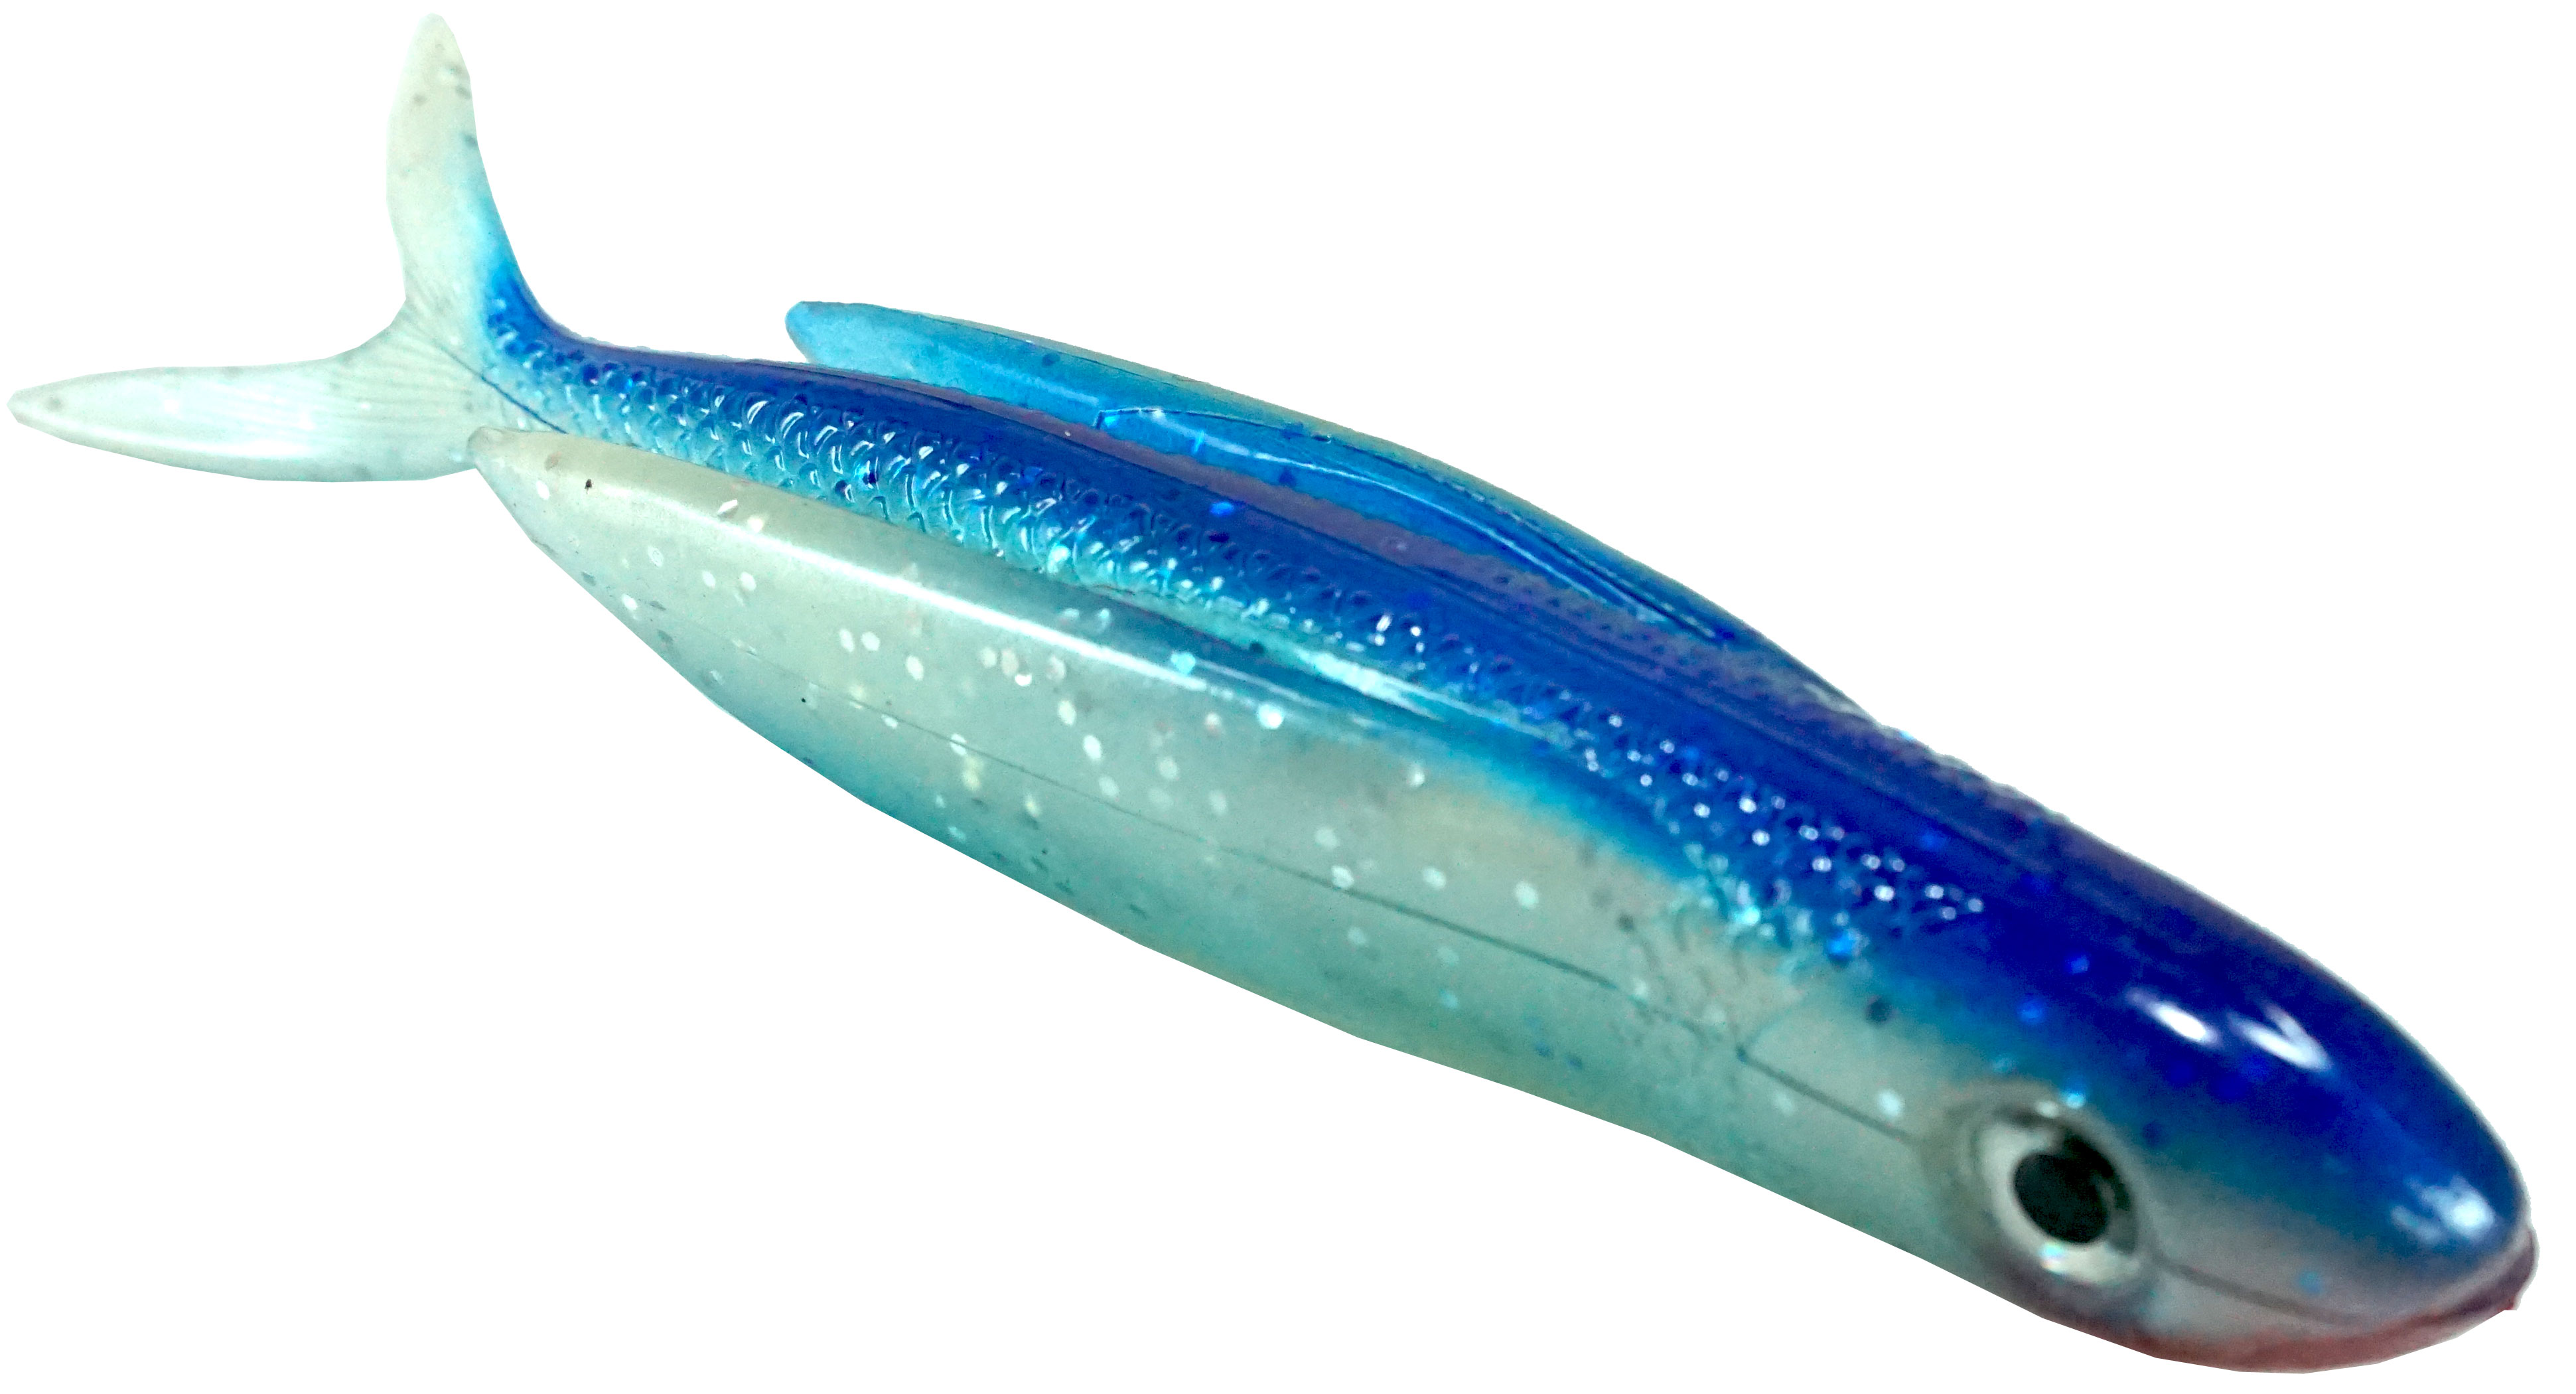 Almost Alive Lures 8.5" Soft Plastic Flying Fish with Swept Back Wing Bait Blue Back/Red Nose